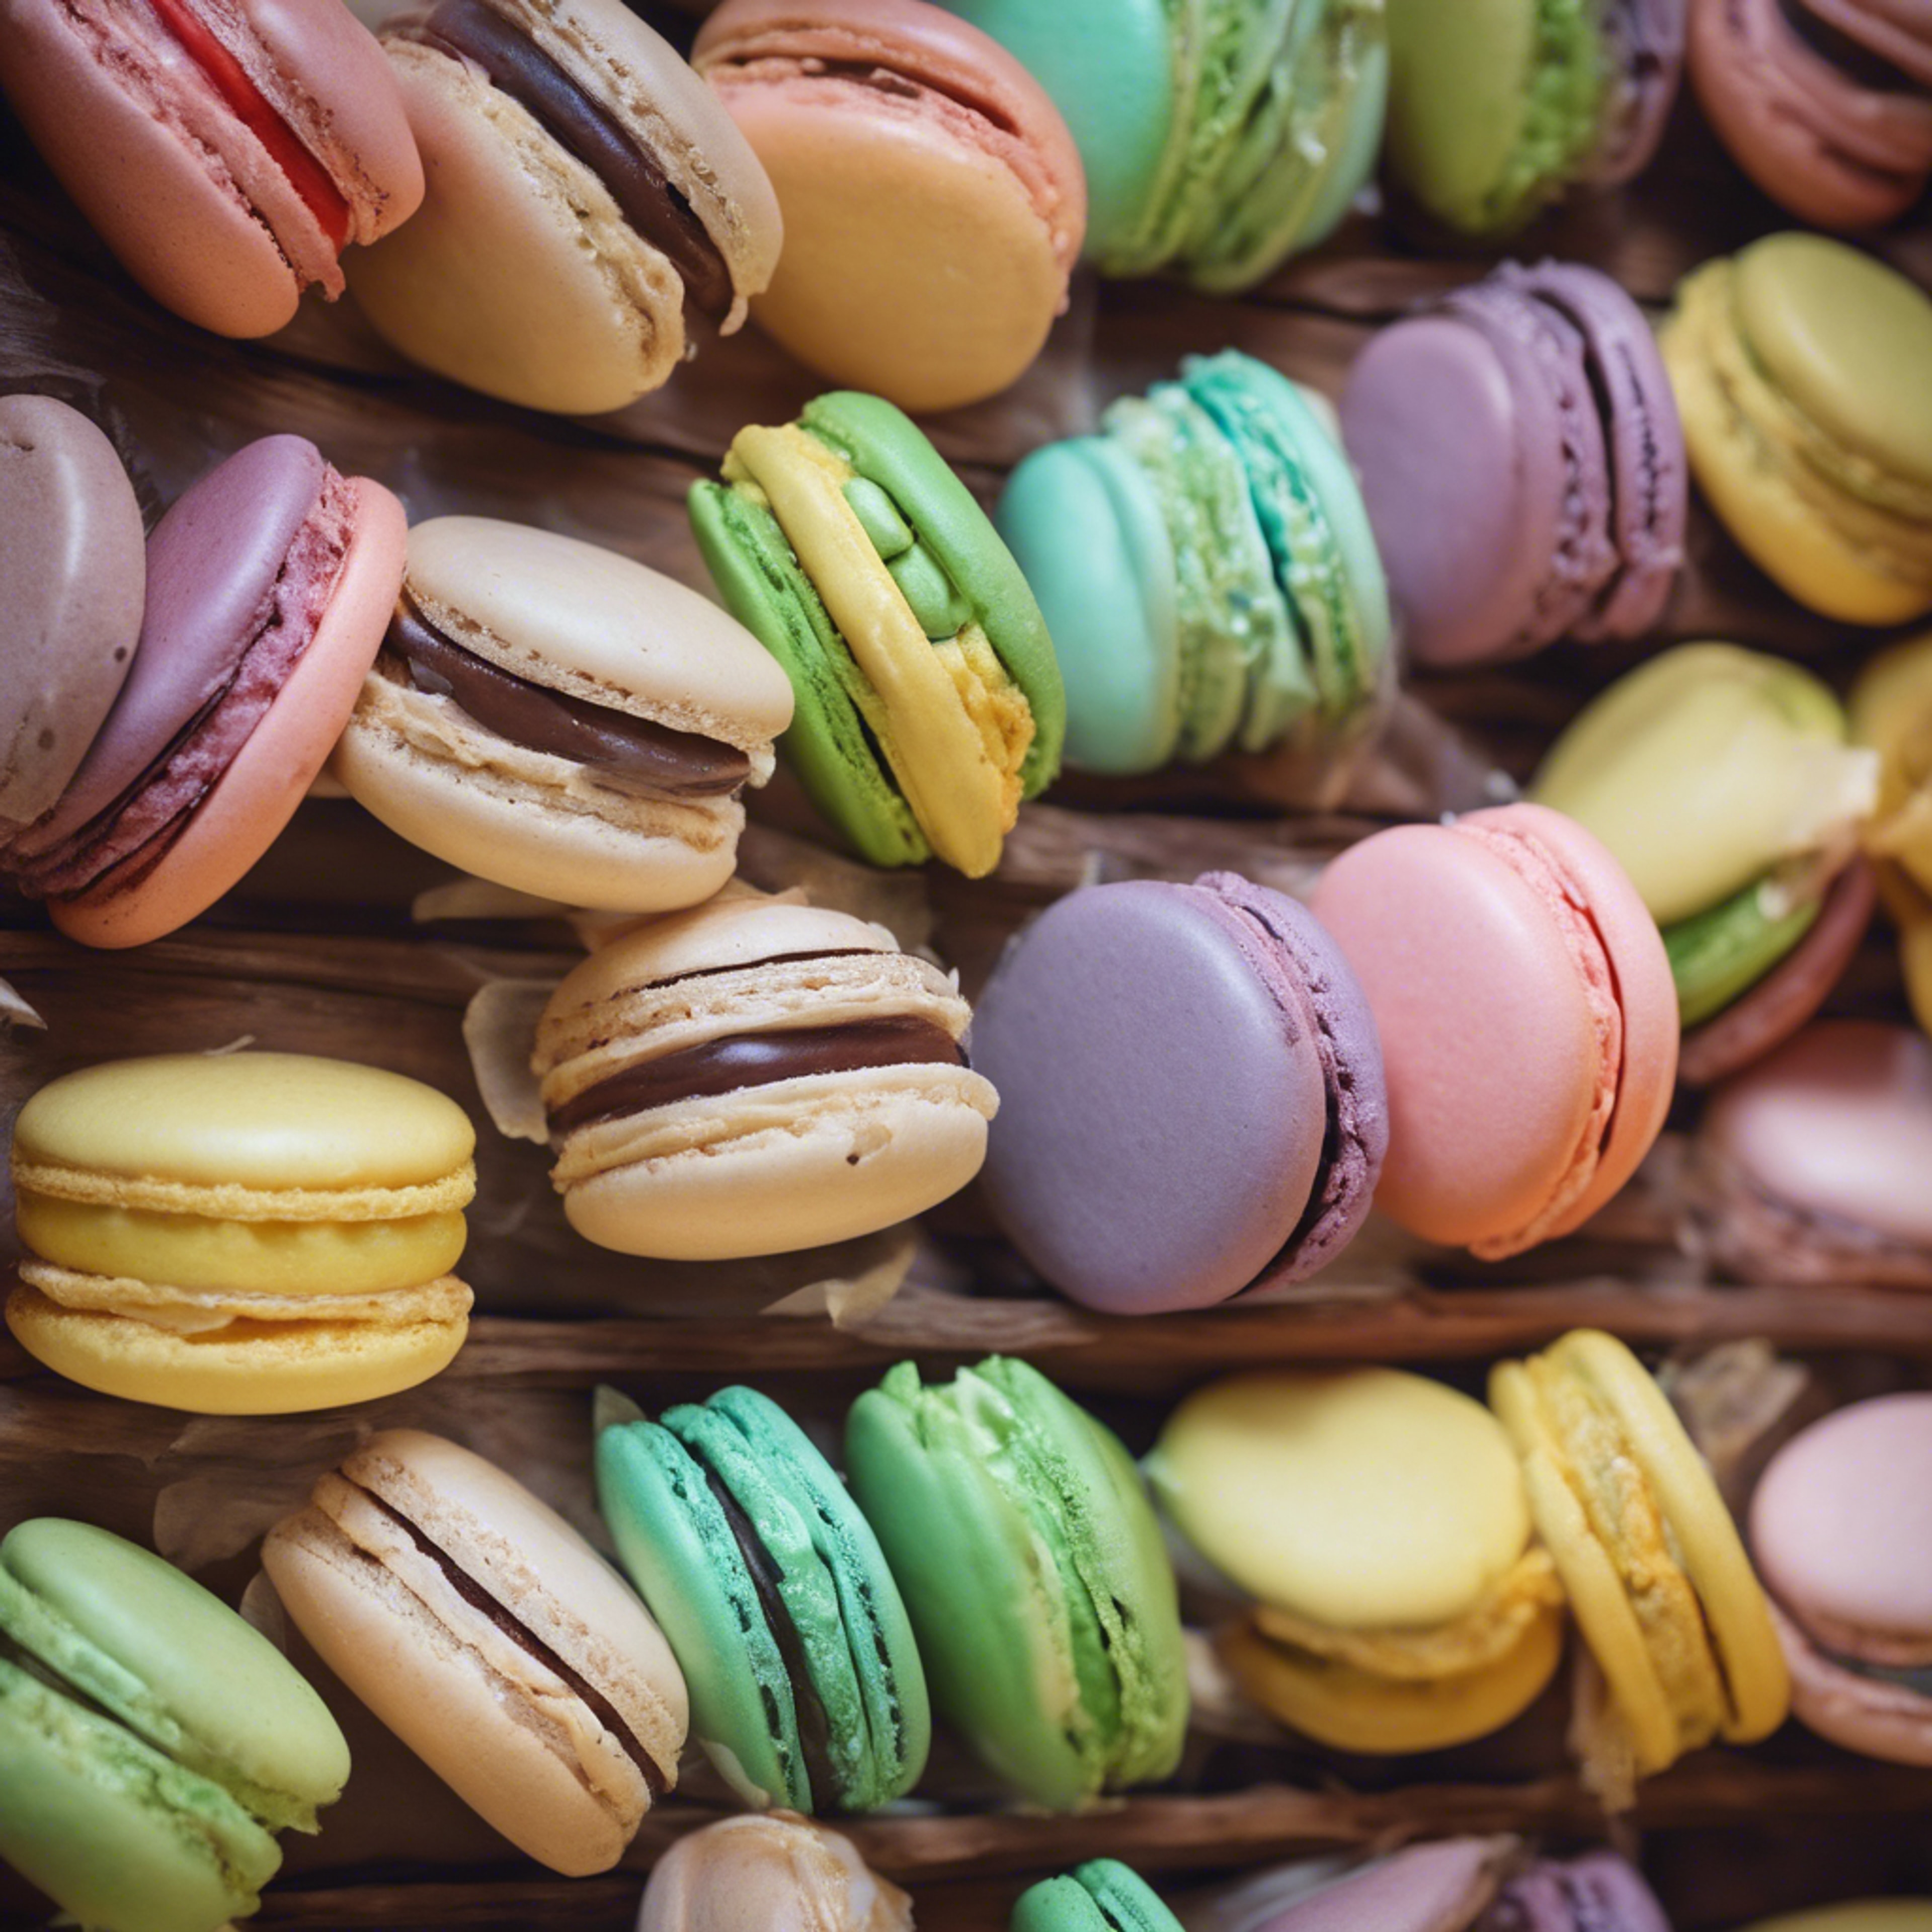 An old-fashioned nostalgic bakery displaying various colorful macarons.壁紙[50adf48075104113b6f7]